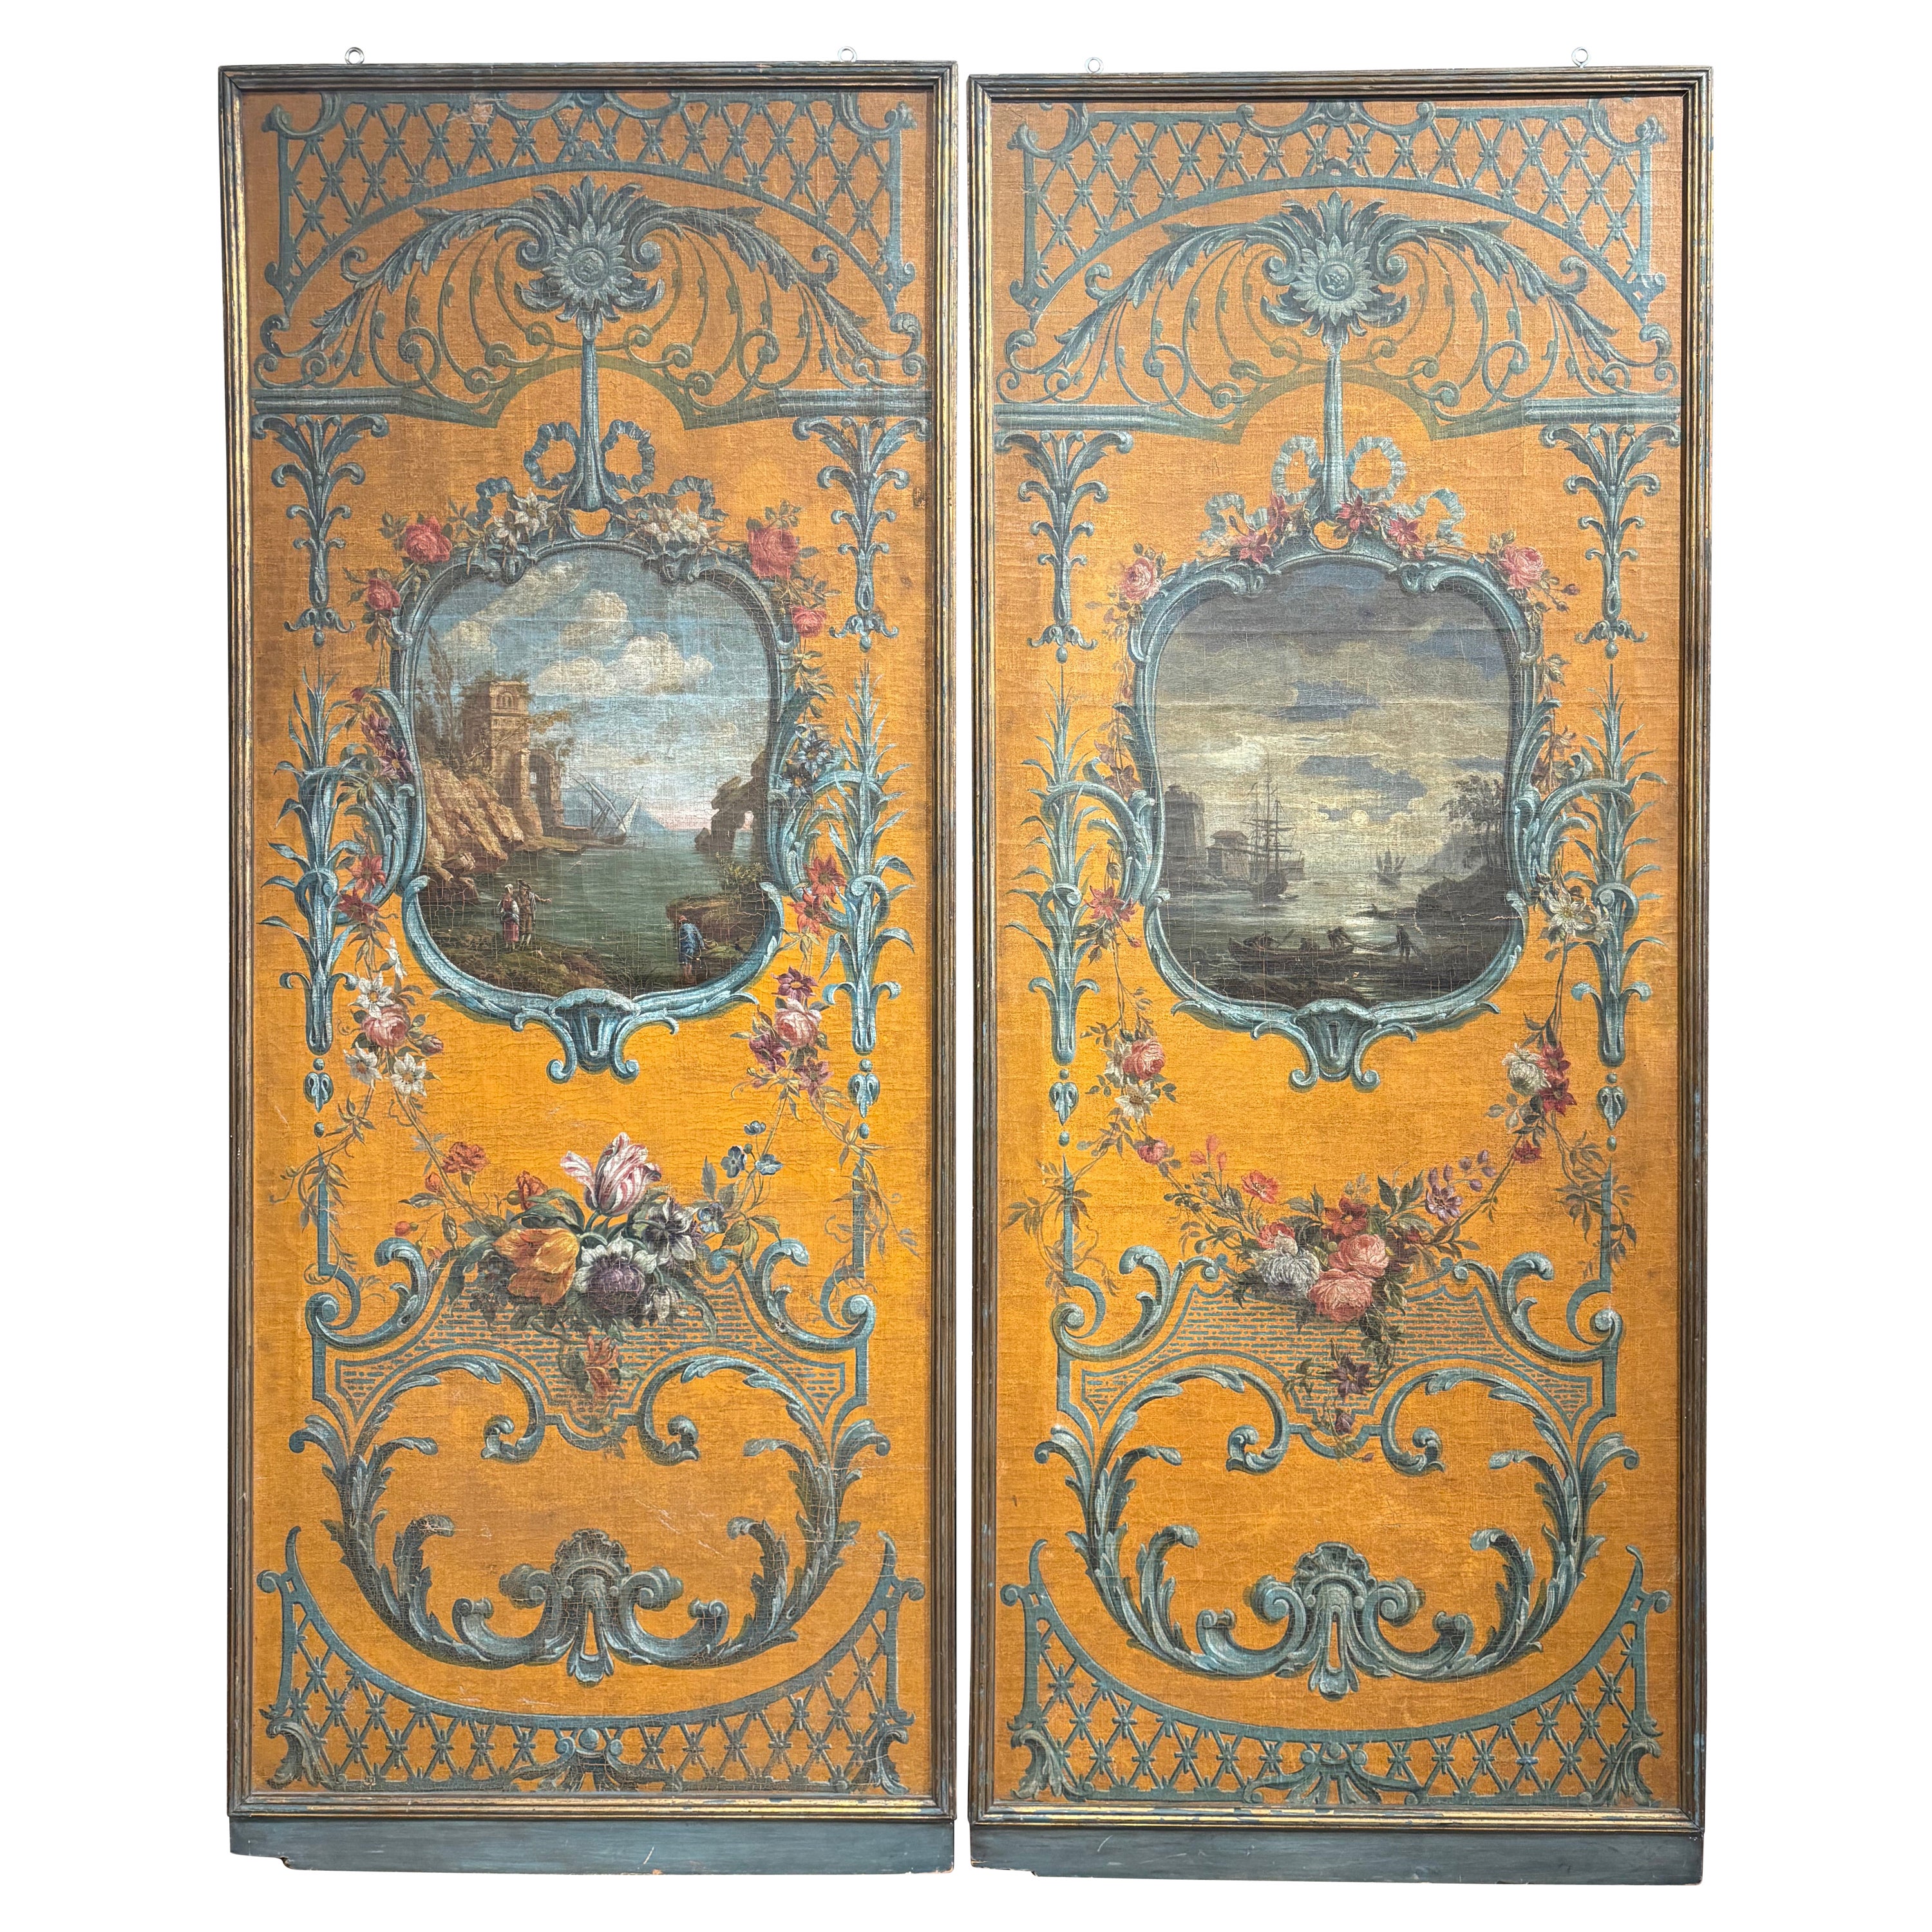 Pair of Large 19th Century Hand Painted Wall Panels on Canvas in Gilt Frames